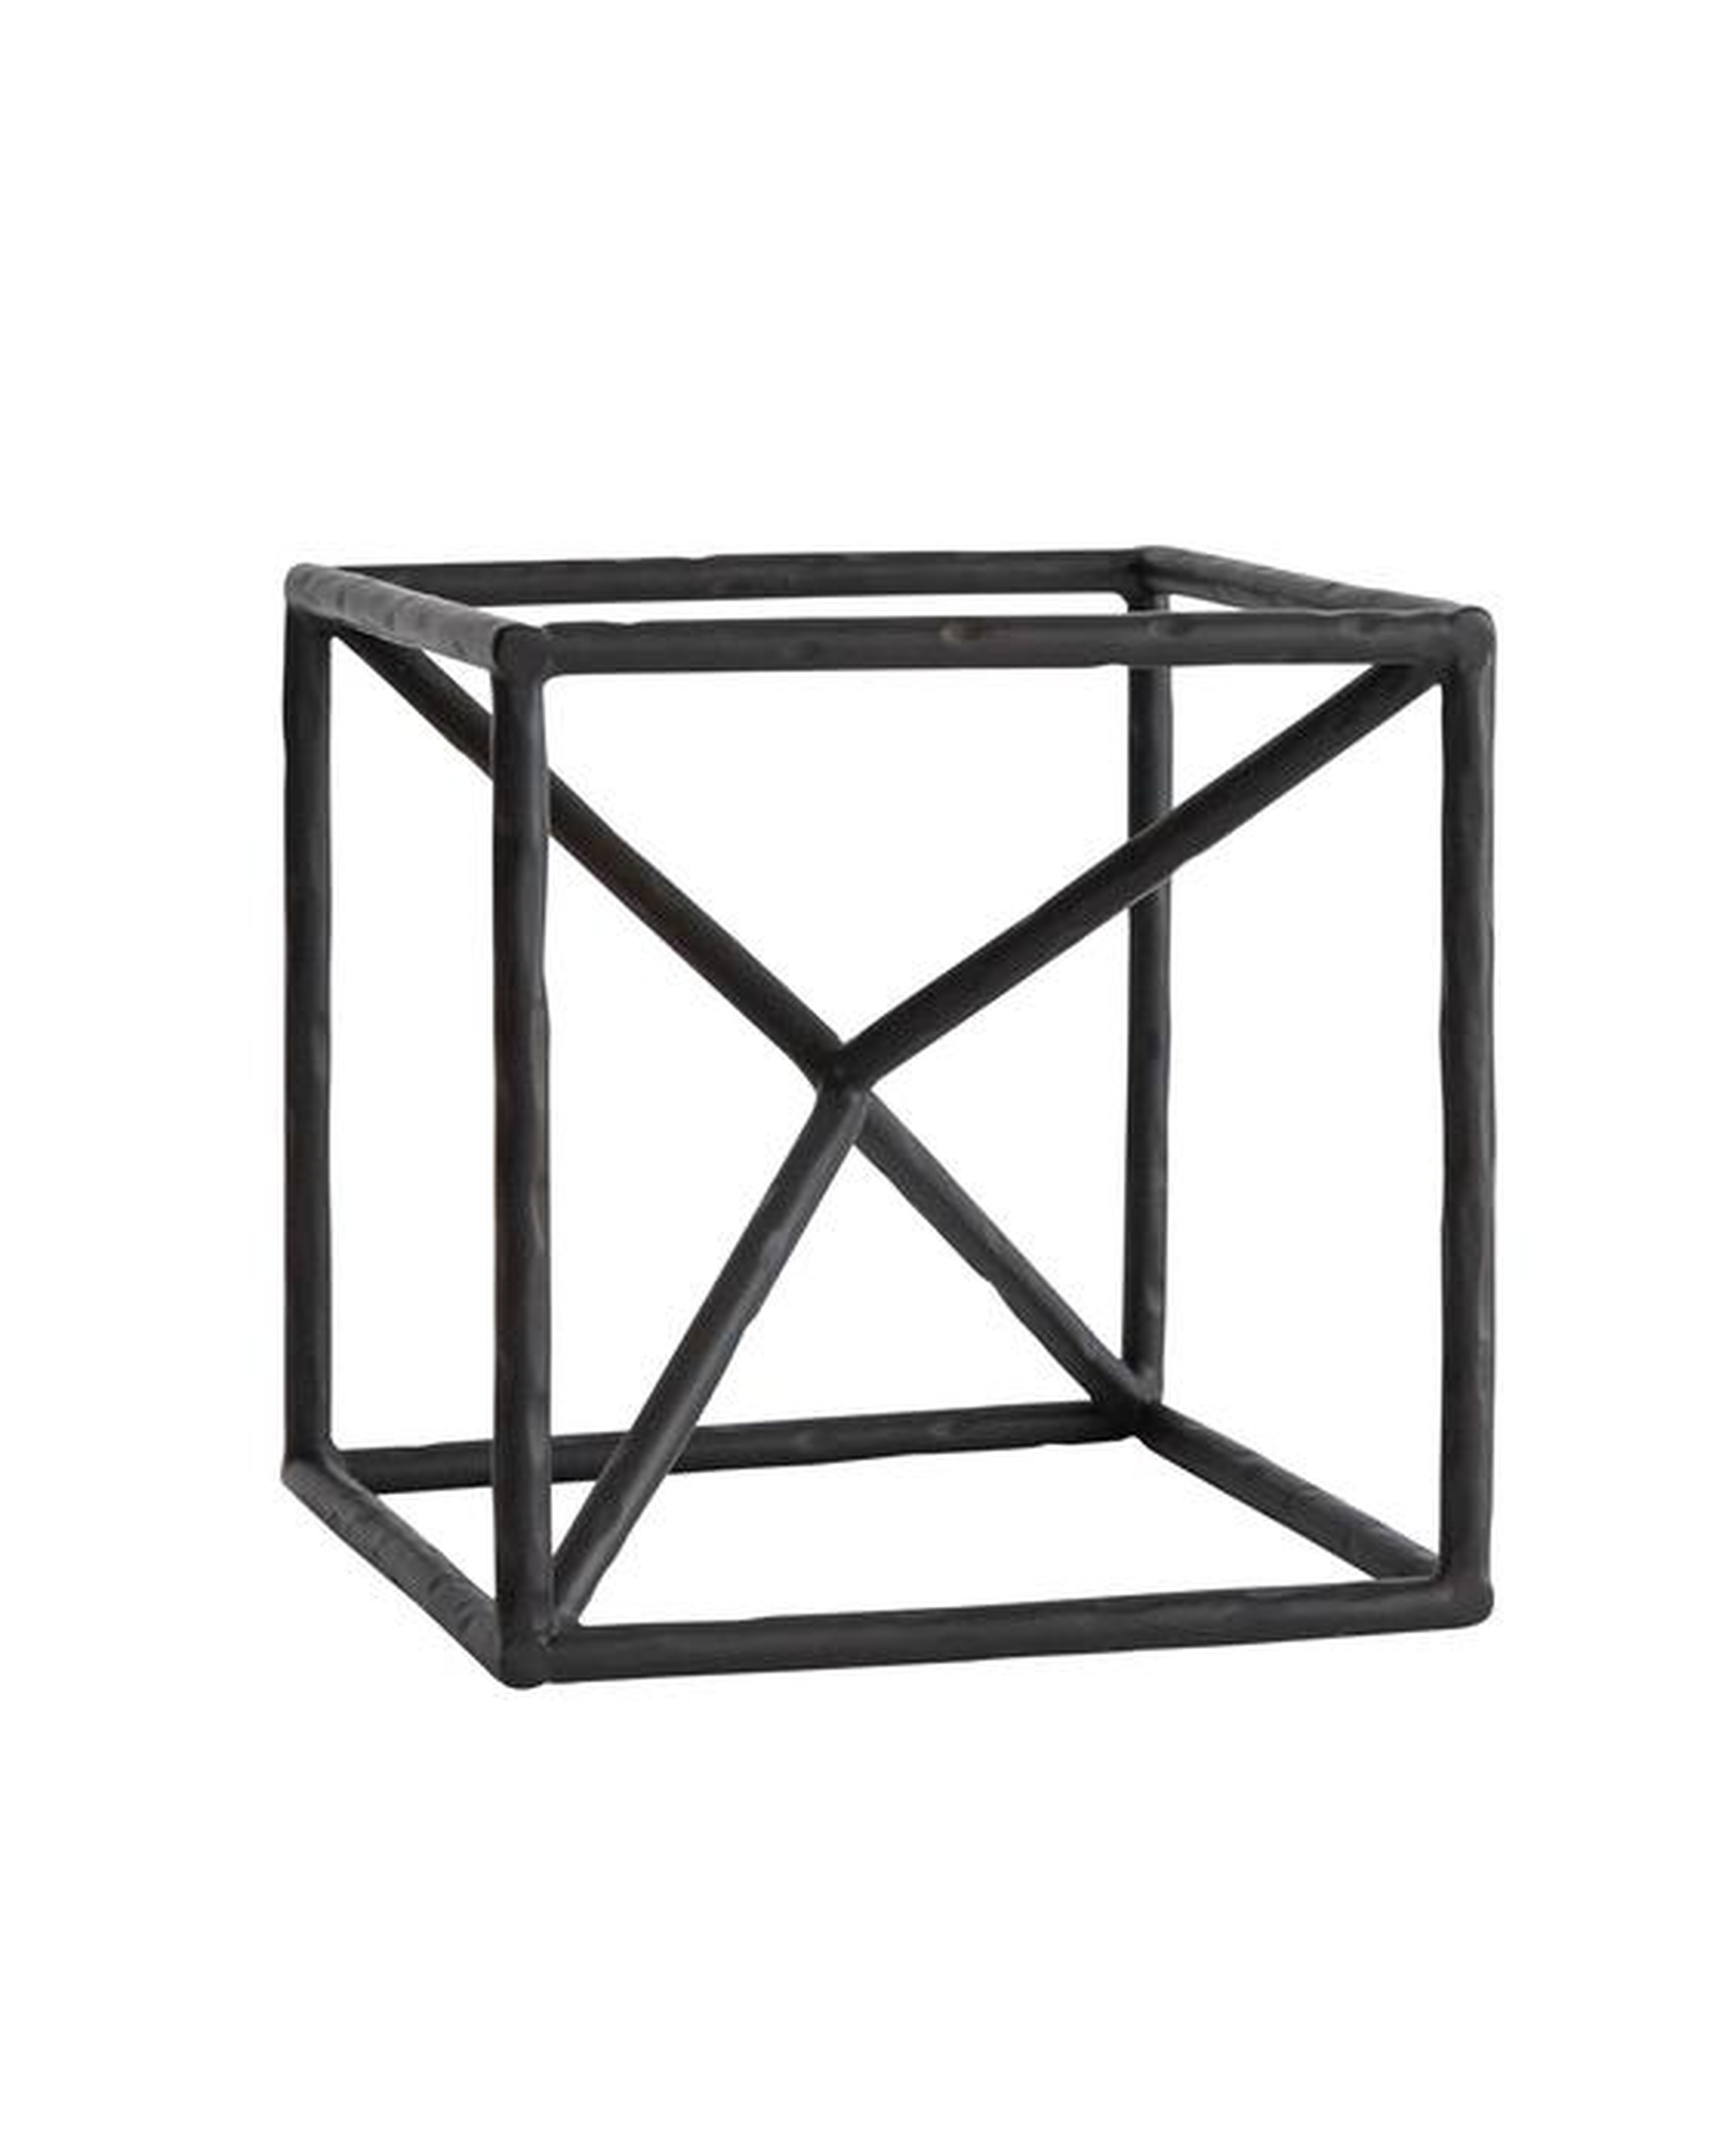 Iron Cubed Object - McGee & Co.